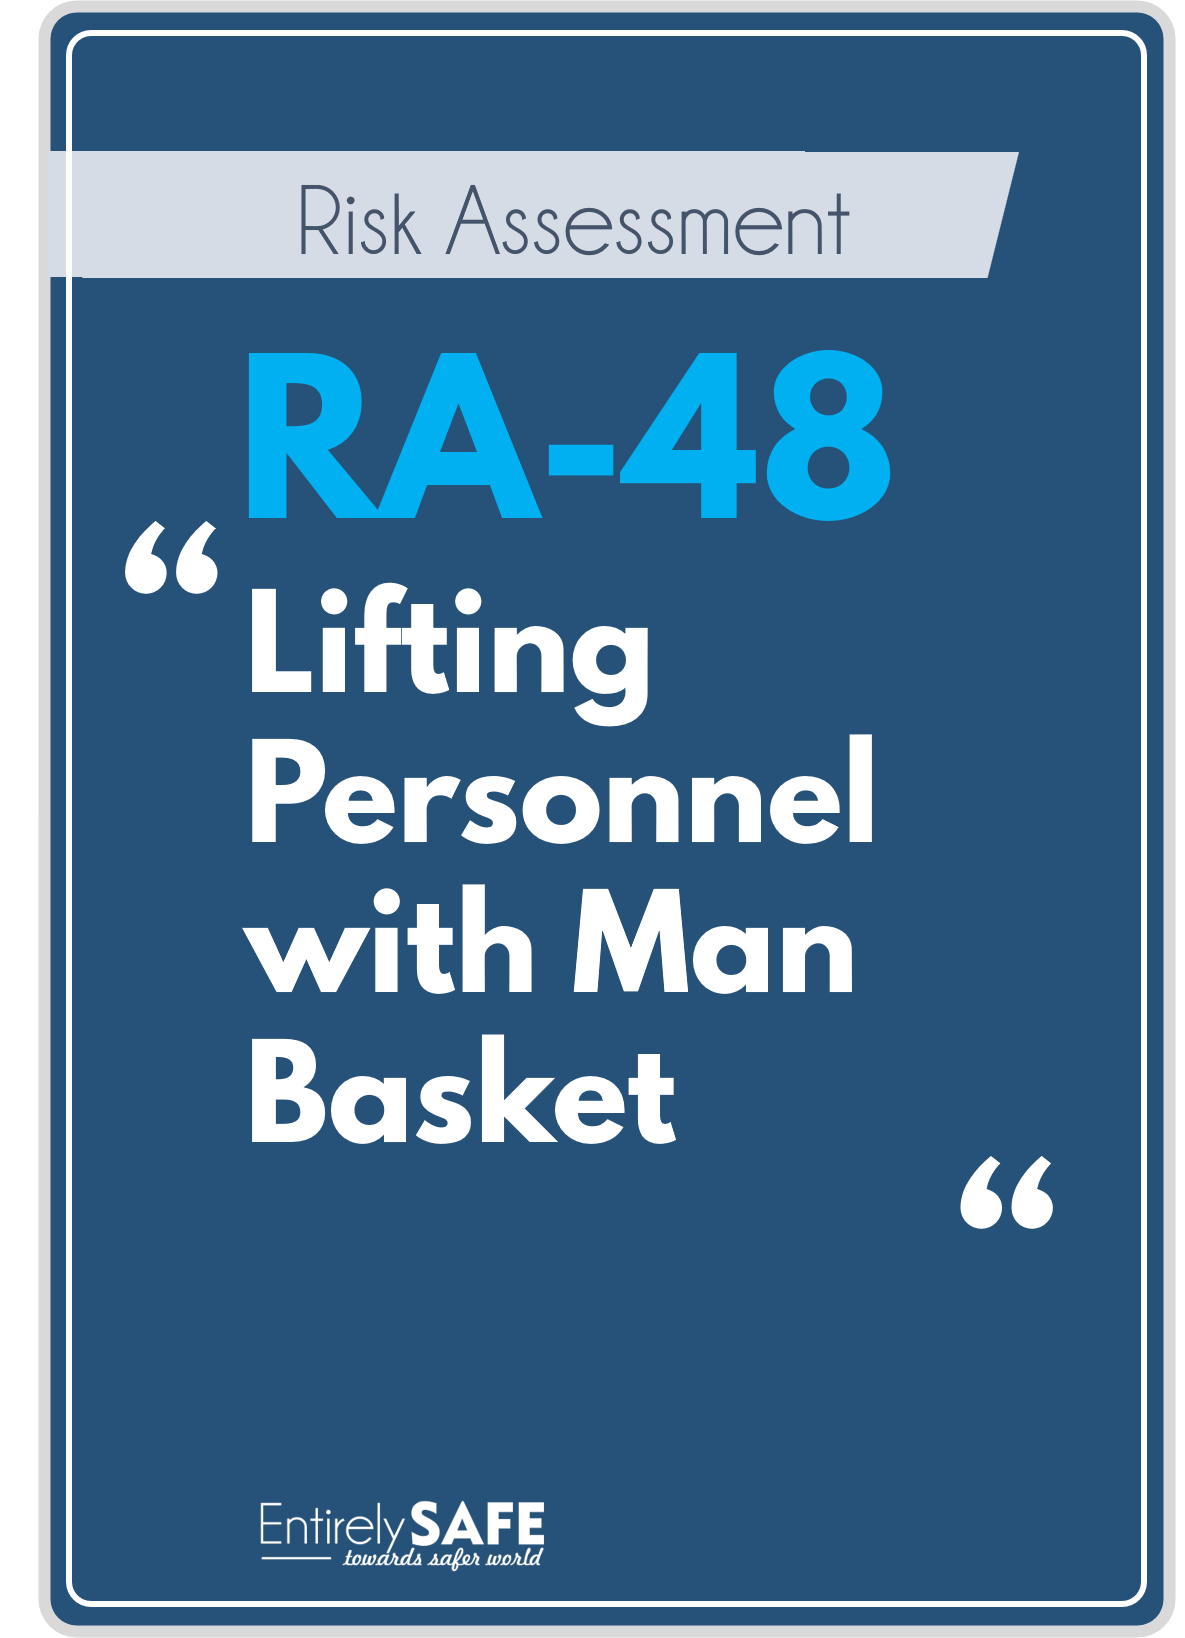 RA-48-Lifting-Personnel-with-Manbasket